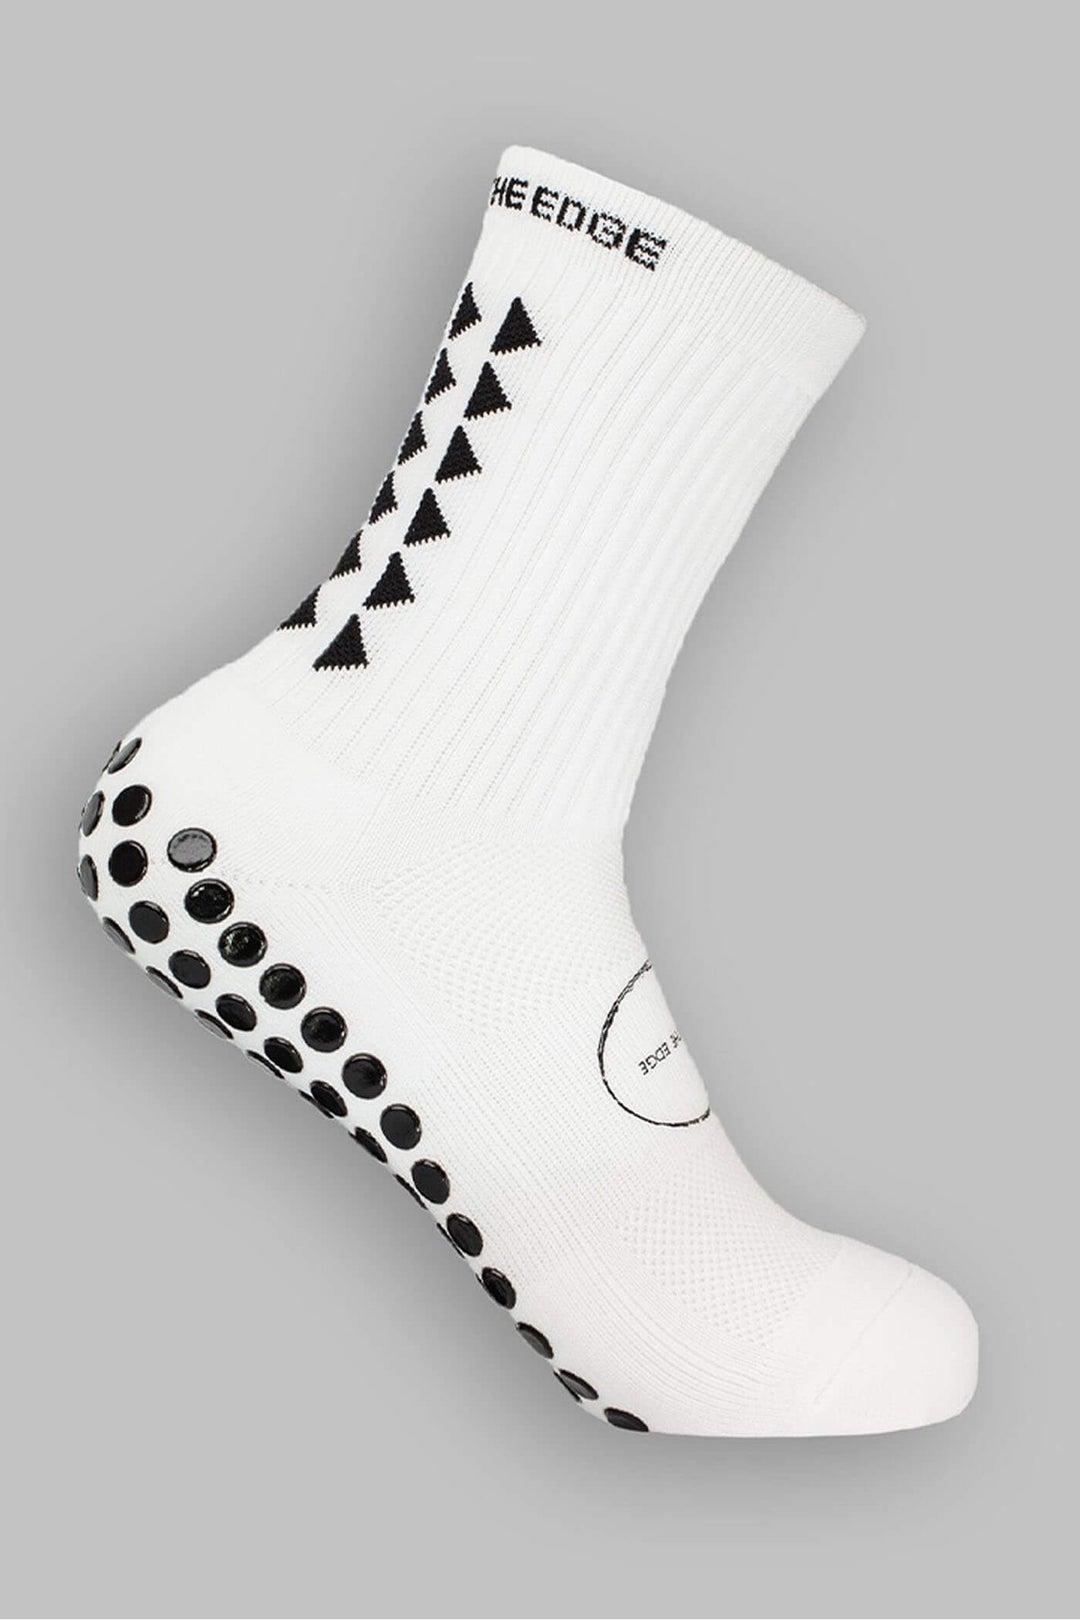 Photo: https://gaintheedgeofficial.com/products/1-grip-socks-2-0-midcalf-length-white, Other